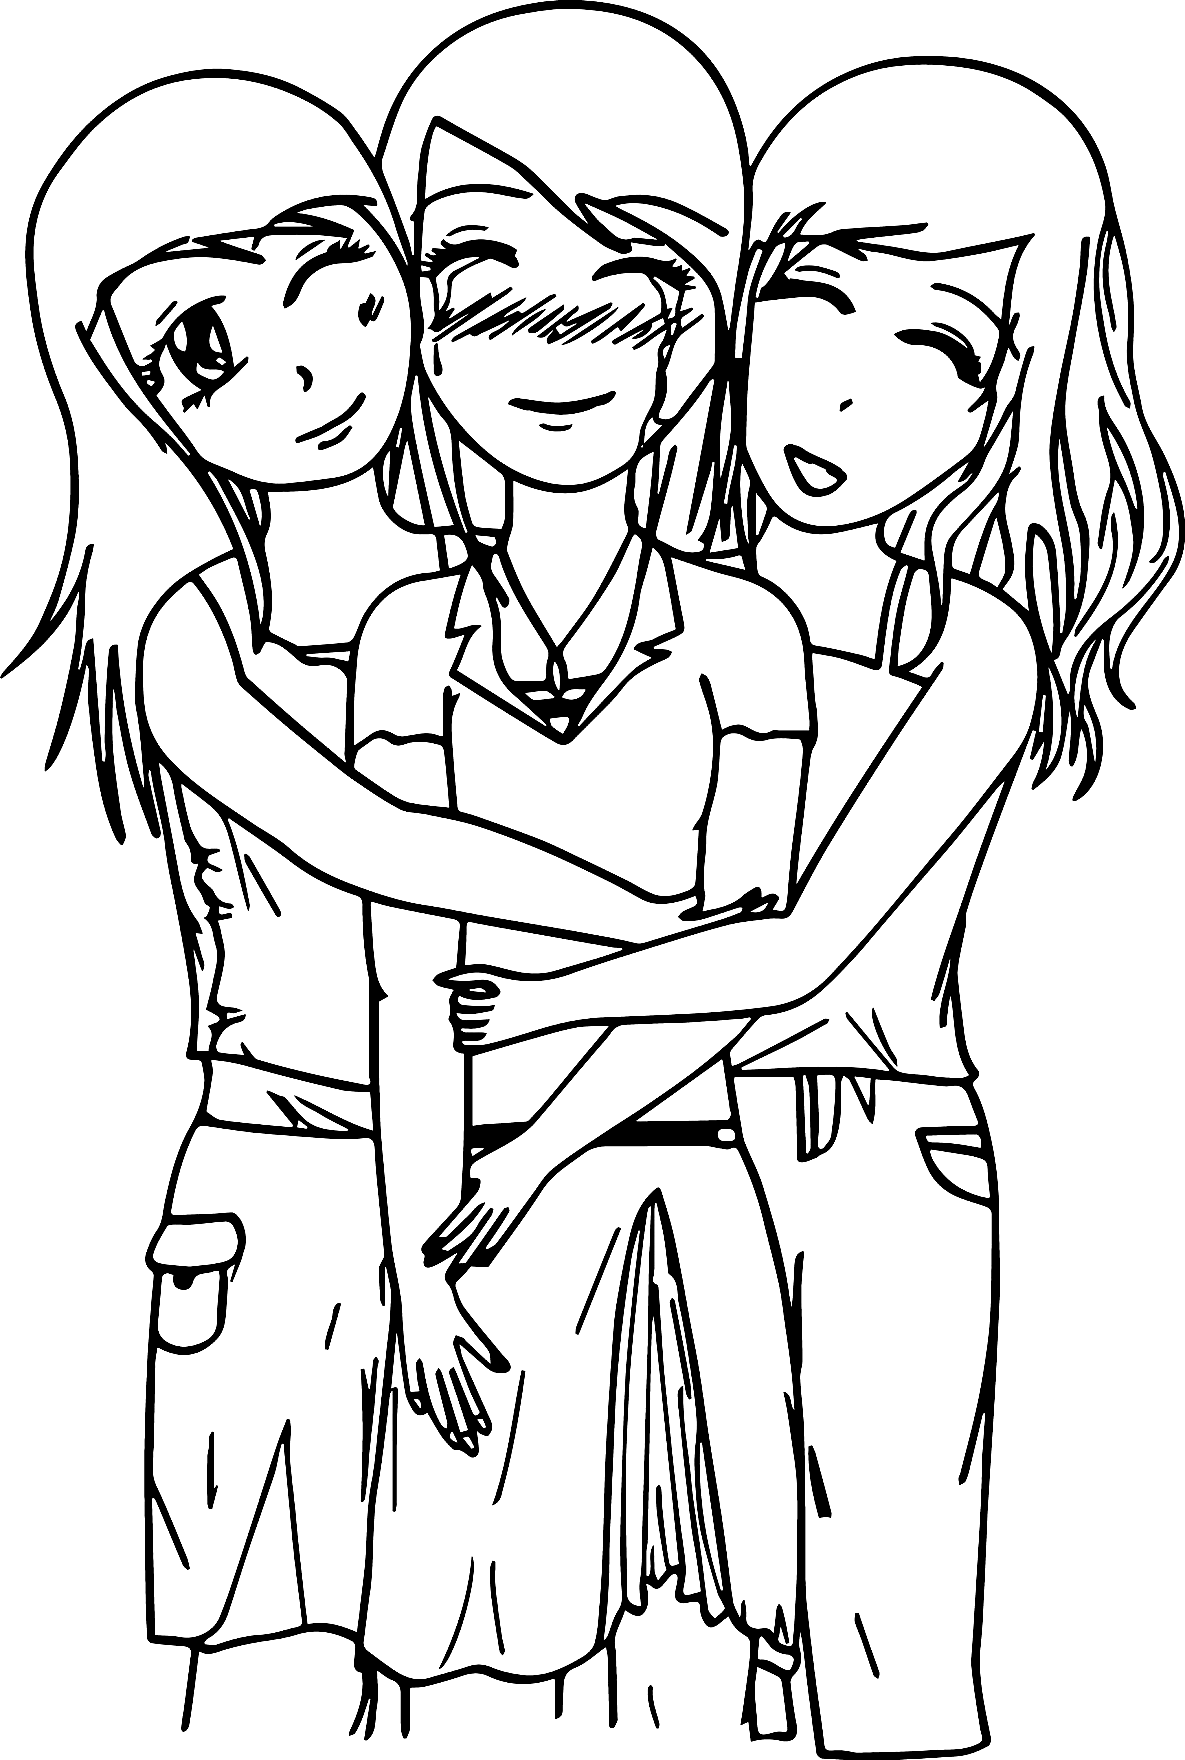 Three Best Friends Coloring Pages   BFF Coloring Pages   Coloring ...